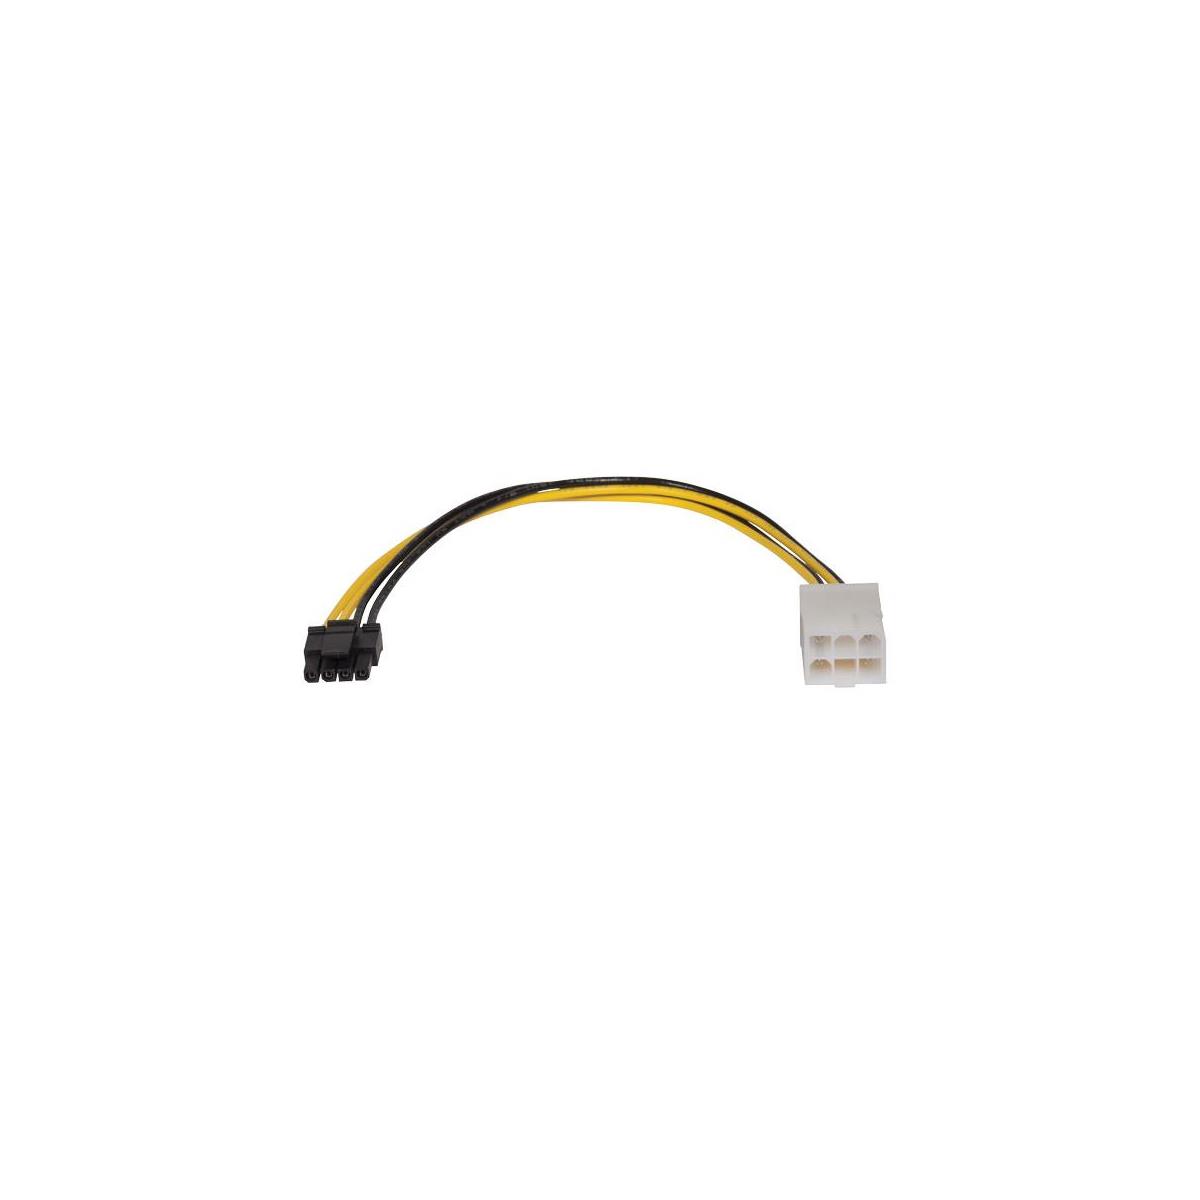 Image of Sonnet HDX PCIe Card Power Adapter Cable